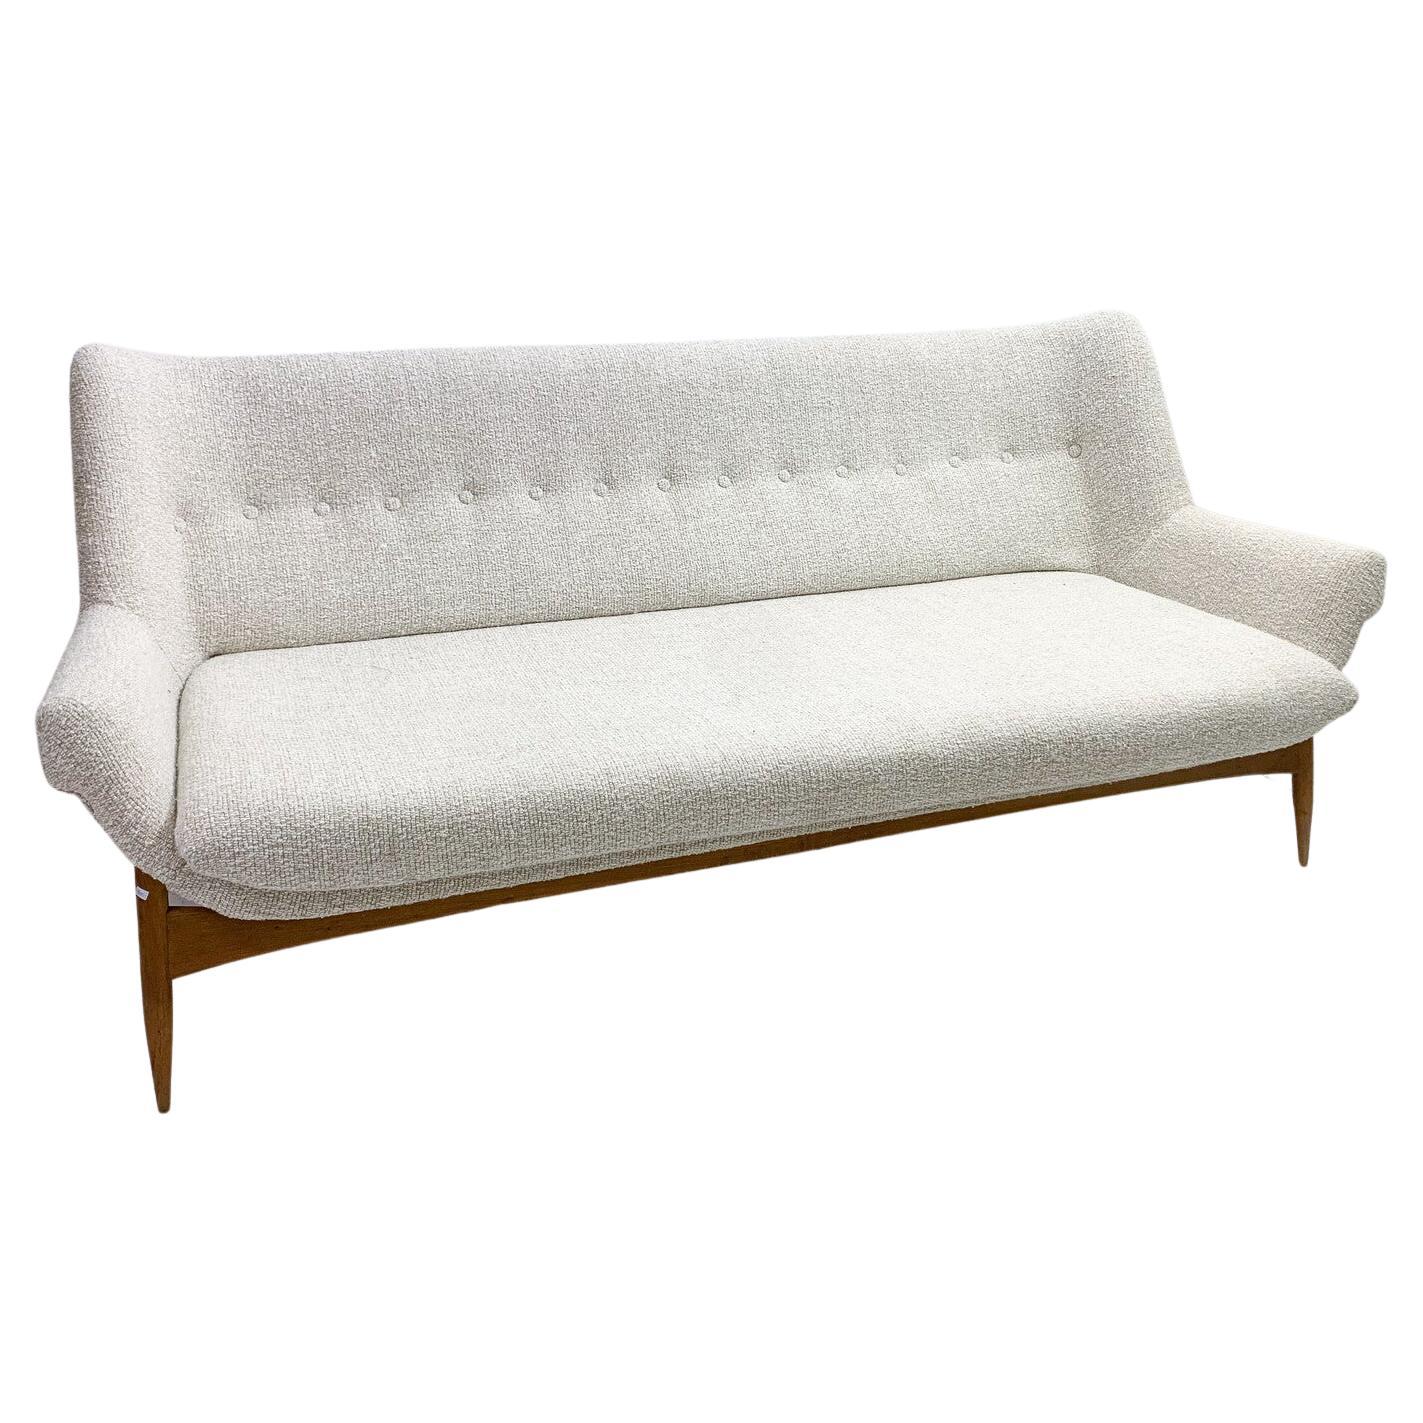 Mid-Century Modern Sofa by Julia Gaubek, Beige Upholstery, Hungary, 1950s For Sale